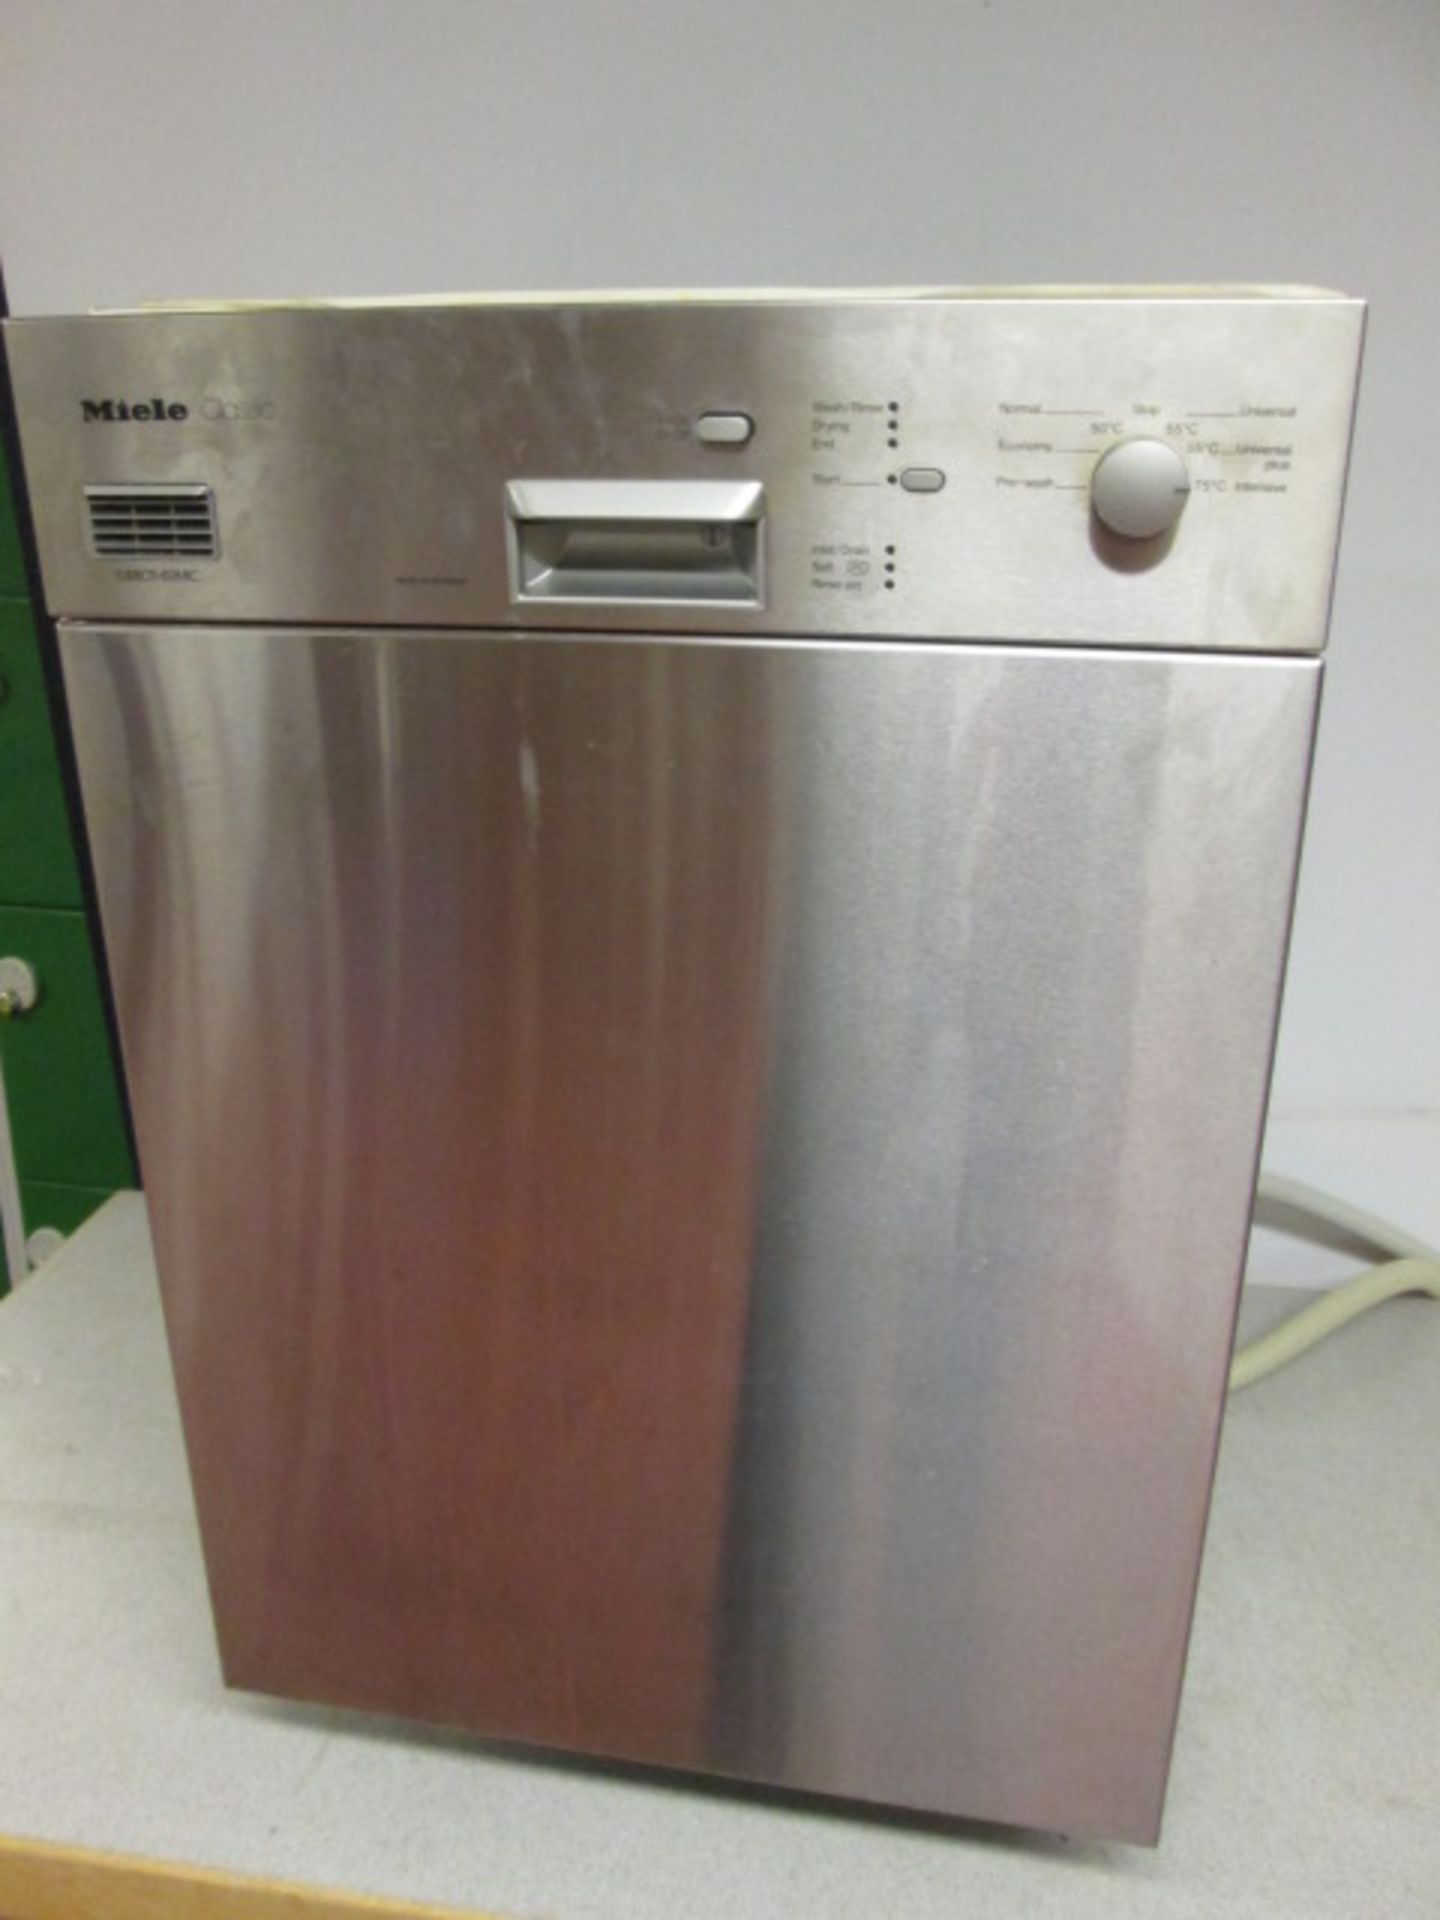 Miele Classic Turbothermic Dishwasher, Model G349SCHE PLUS. (Ex Demonstrator, Used). With